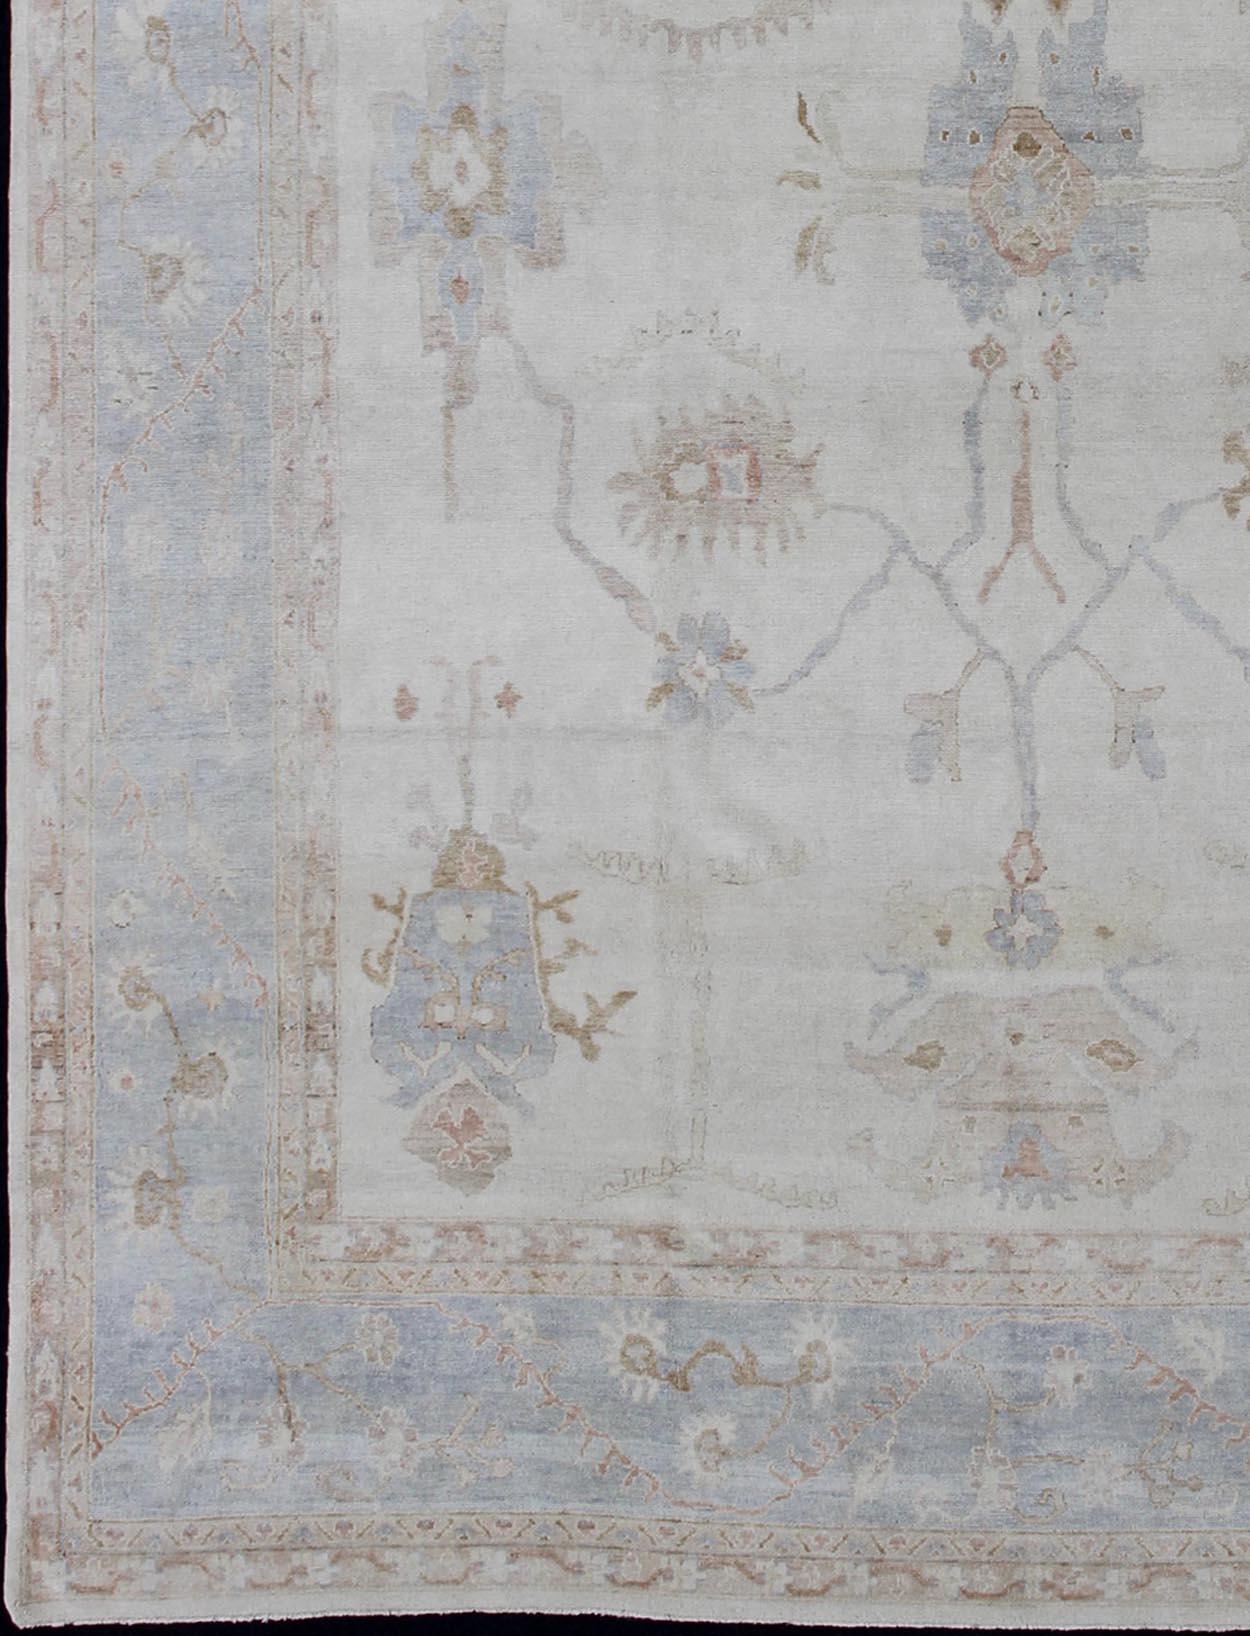 Indian Large Oushak Rug in Blue, Light Brown, and White